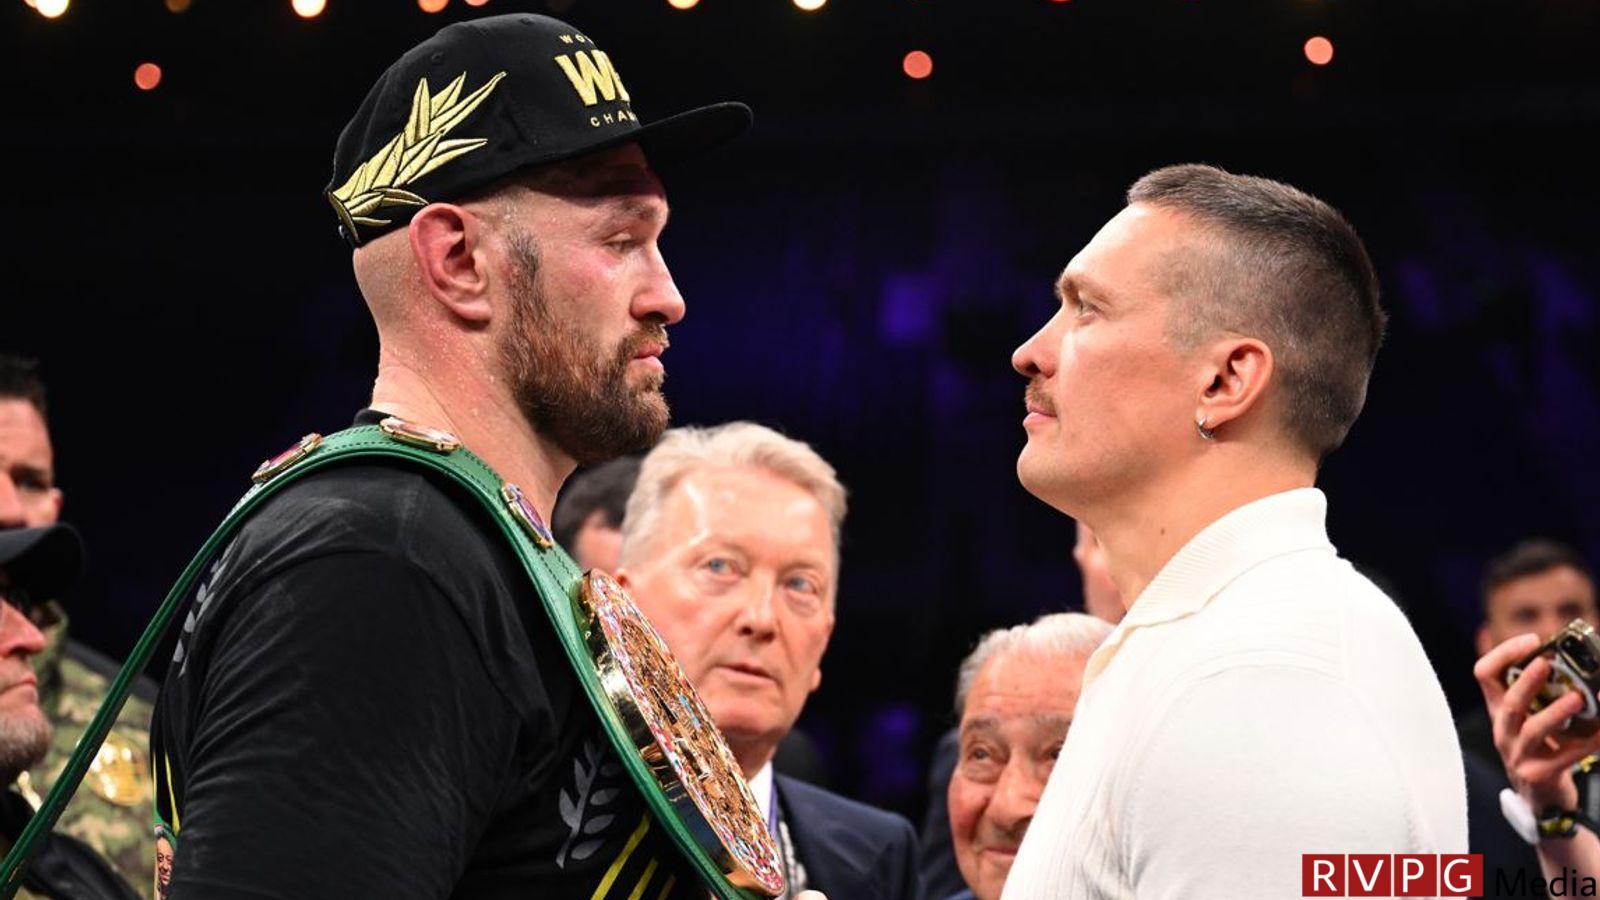 The undisputed title fight between Tyson Fury and Oleksandr Usyk will end in controversy, says Johnny Nelson